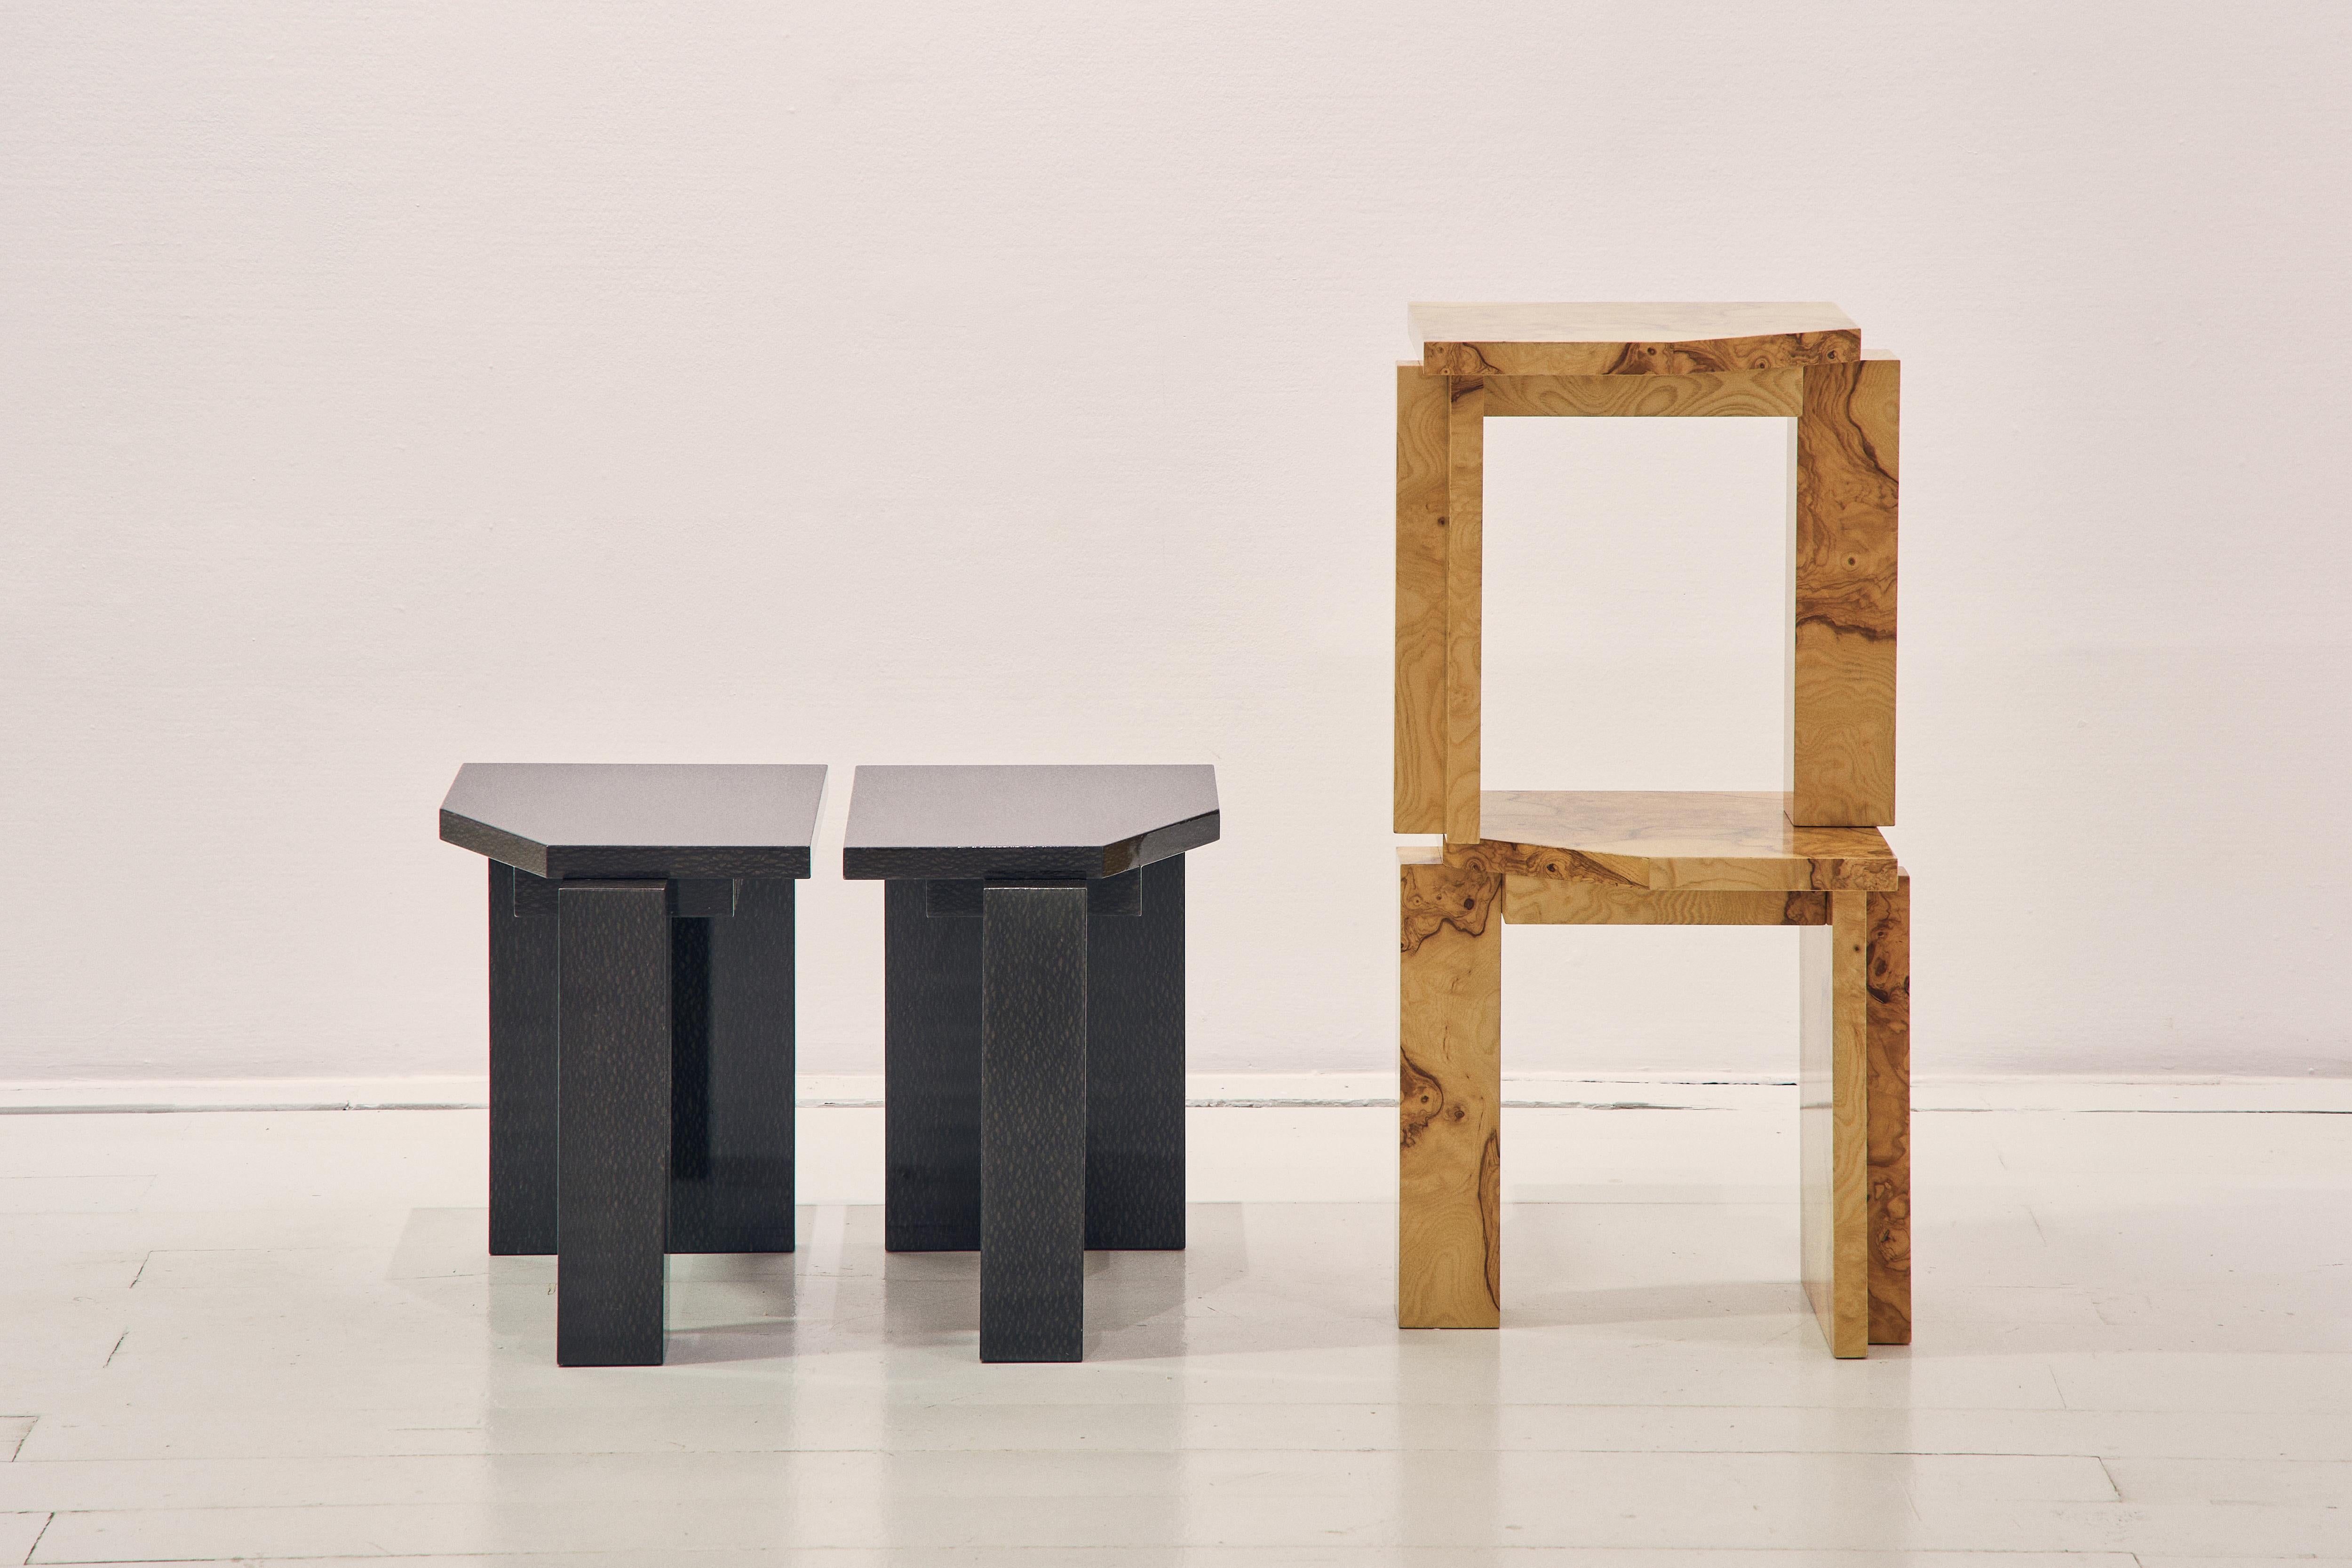 The source of inspiration for the form of the objects is the furniture that construction workers in Russia make for everyday use by means turned out to be at hand on the site.
The stool is made of MDF and after totally covered with a lacewood